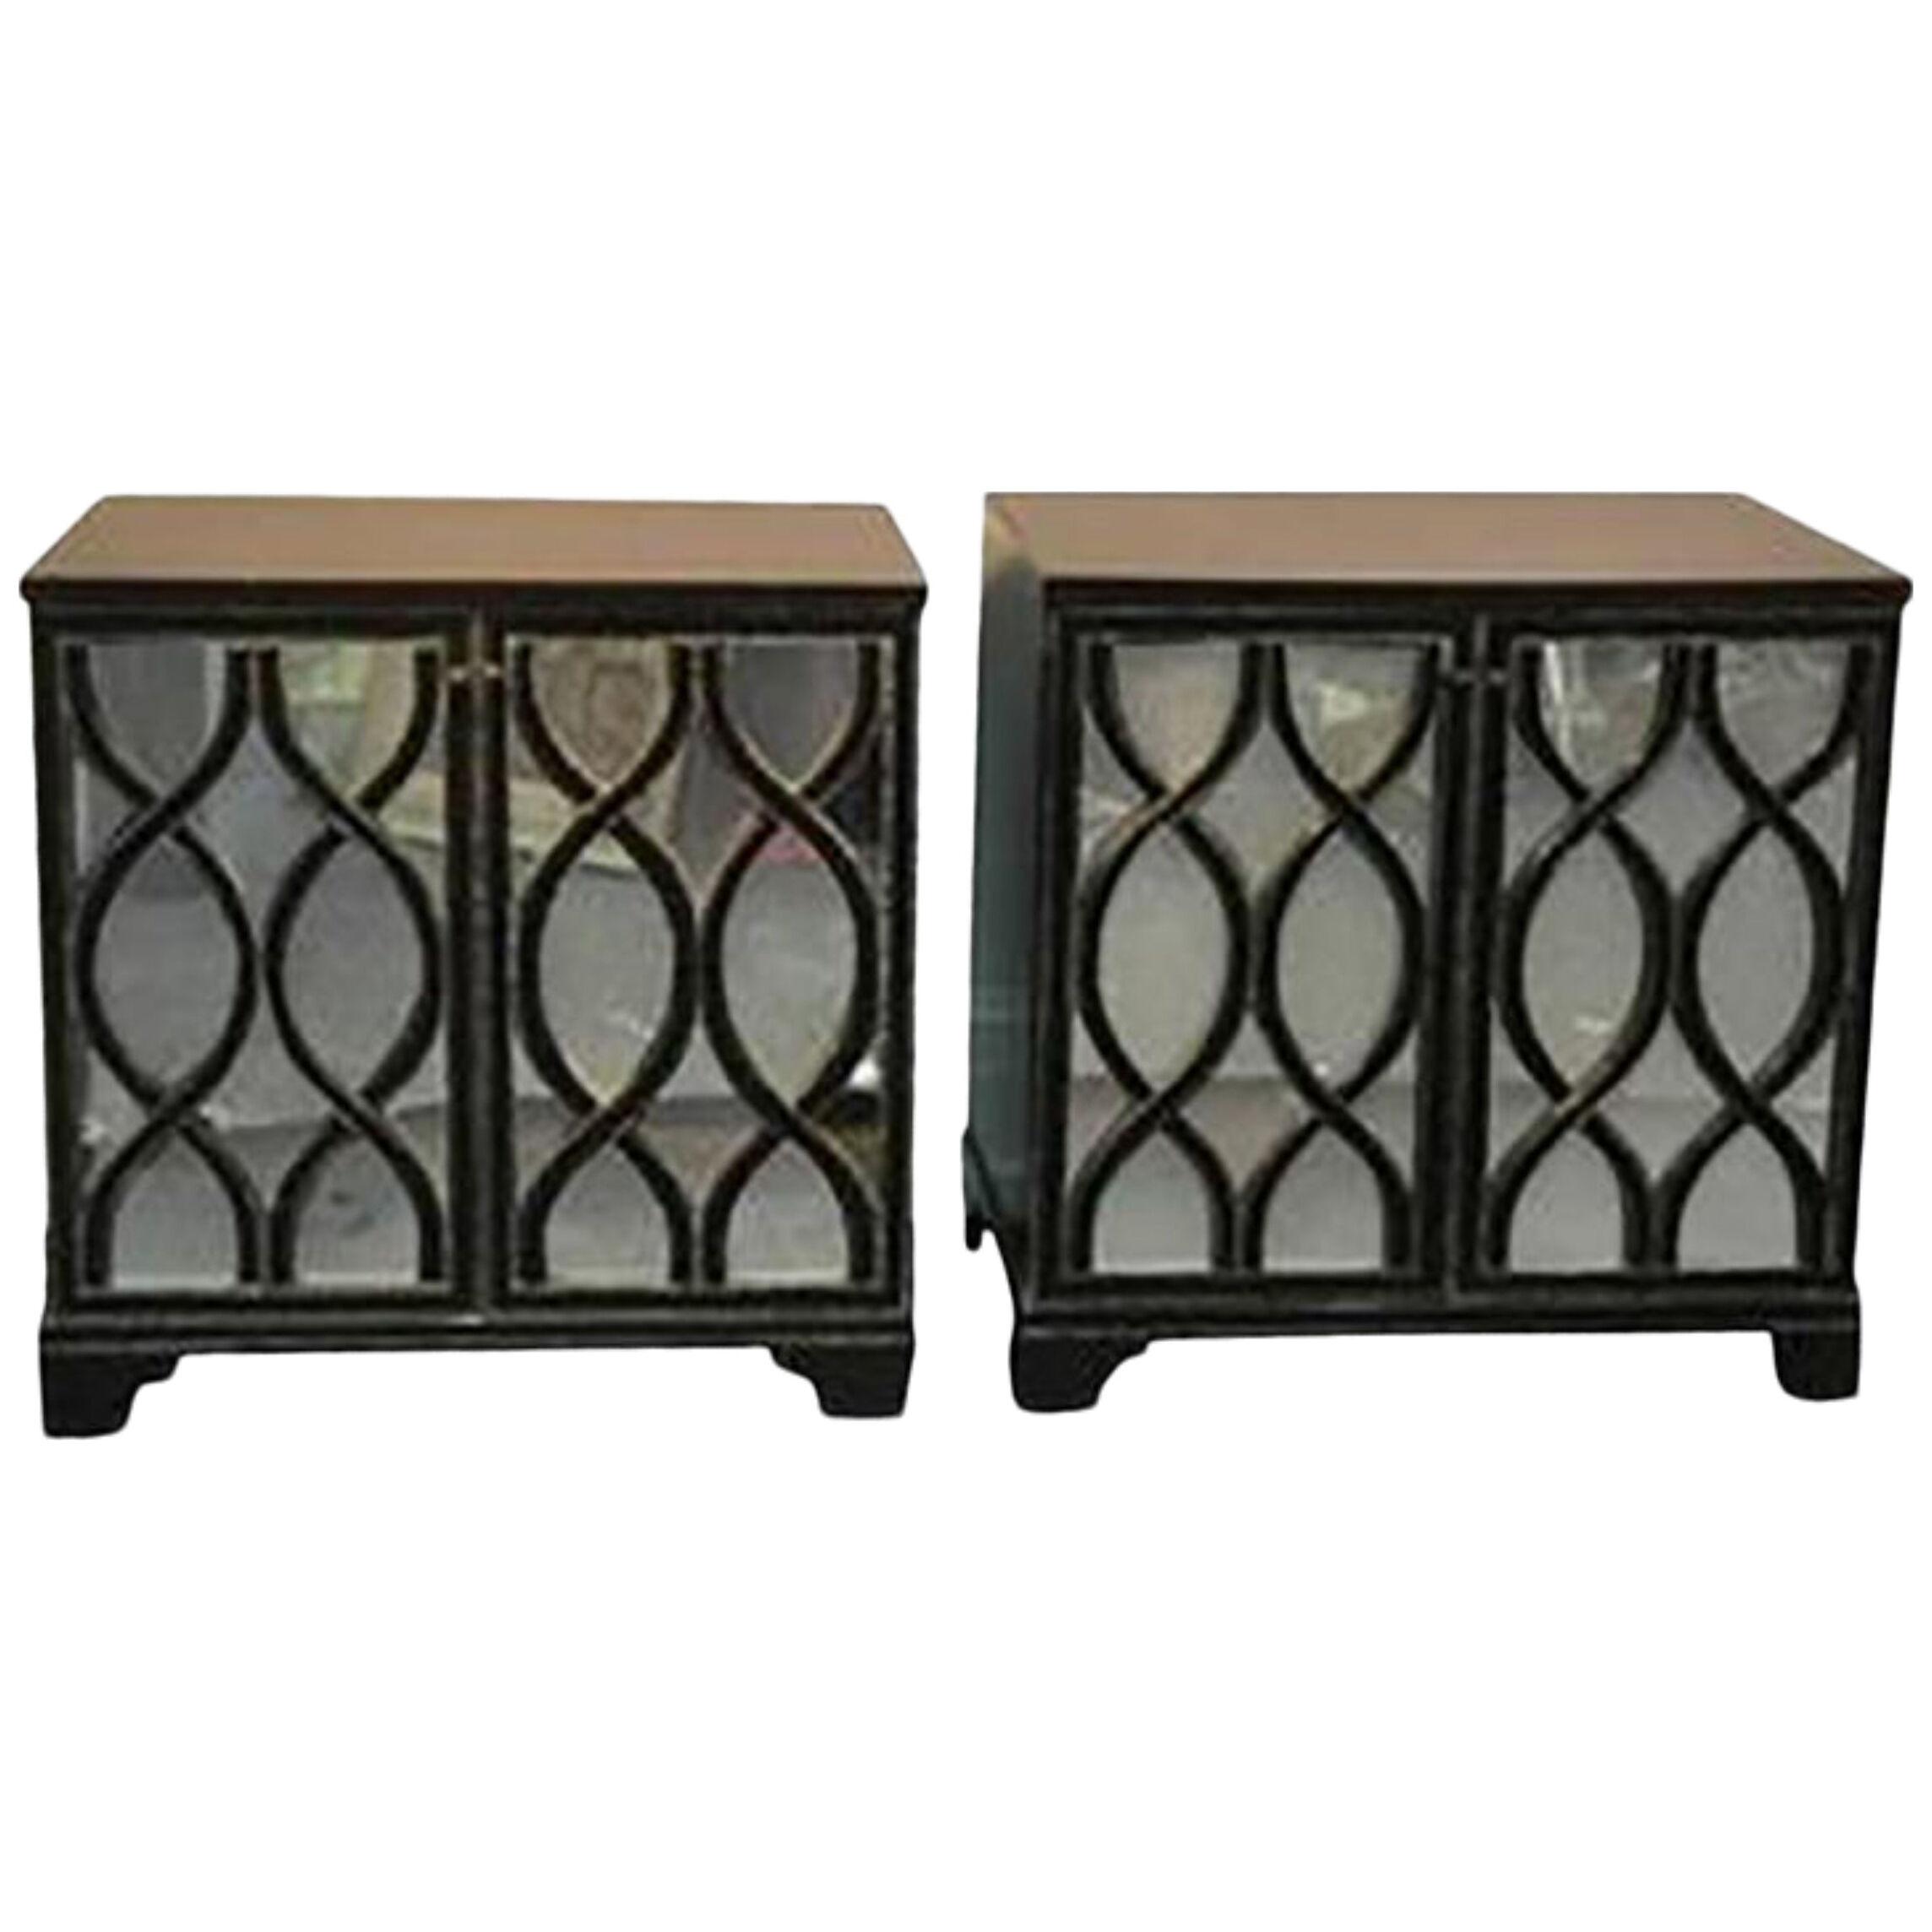 James Mont Inspired Mirrored Commodes With Carved Wood Overlay - a Pair